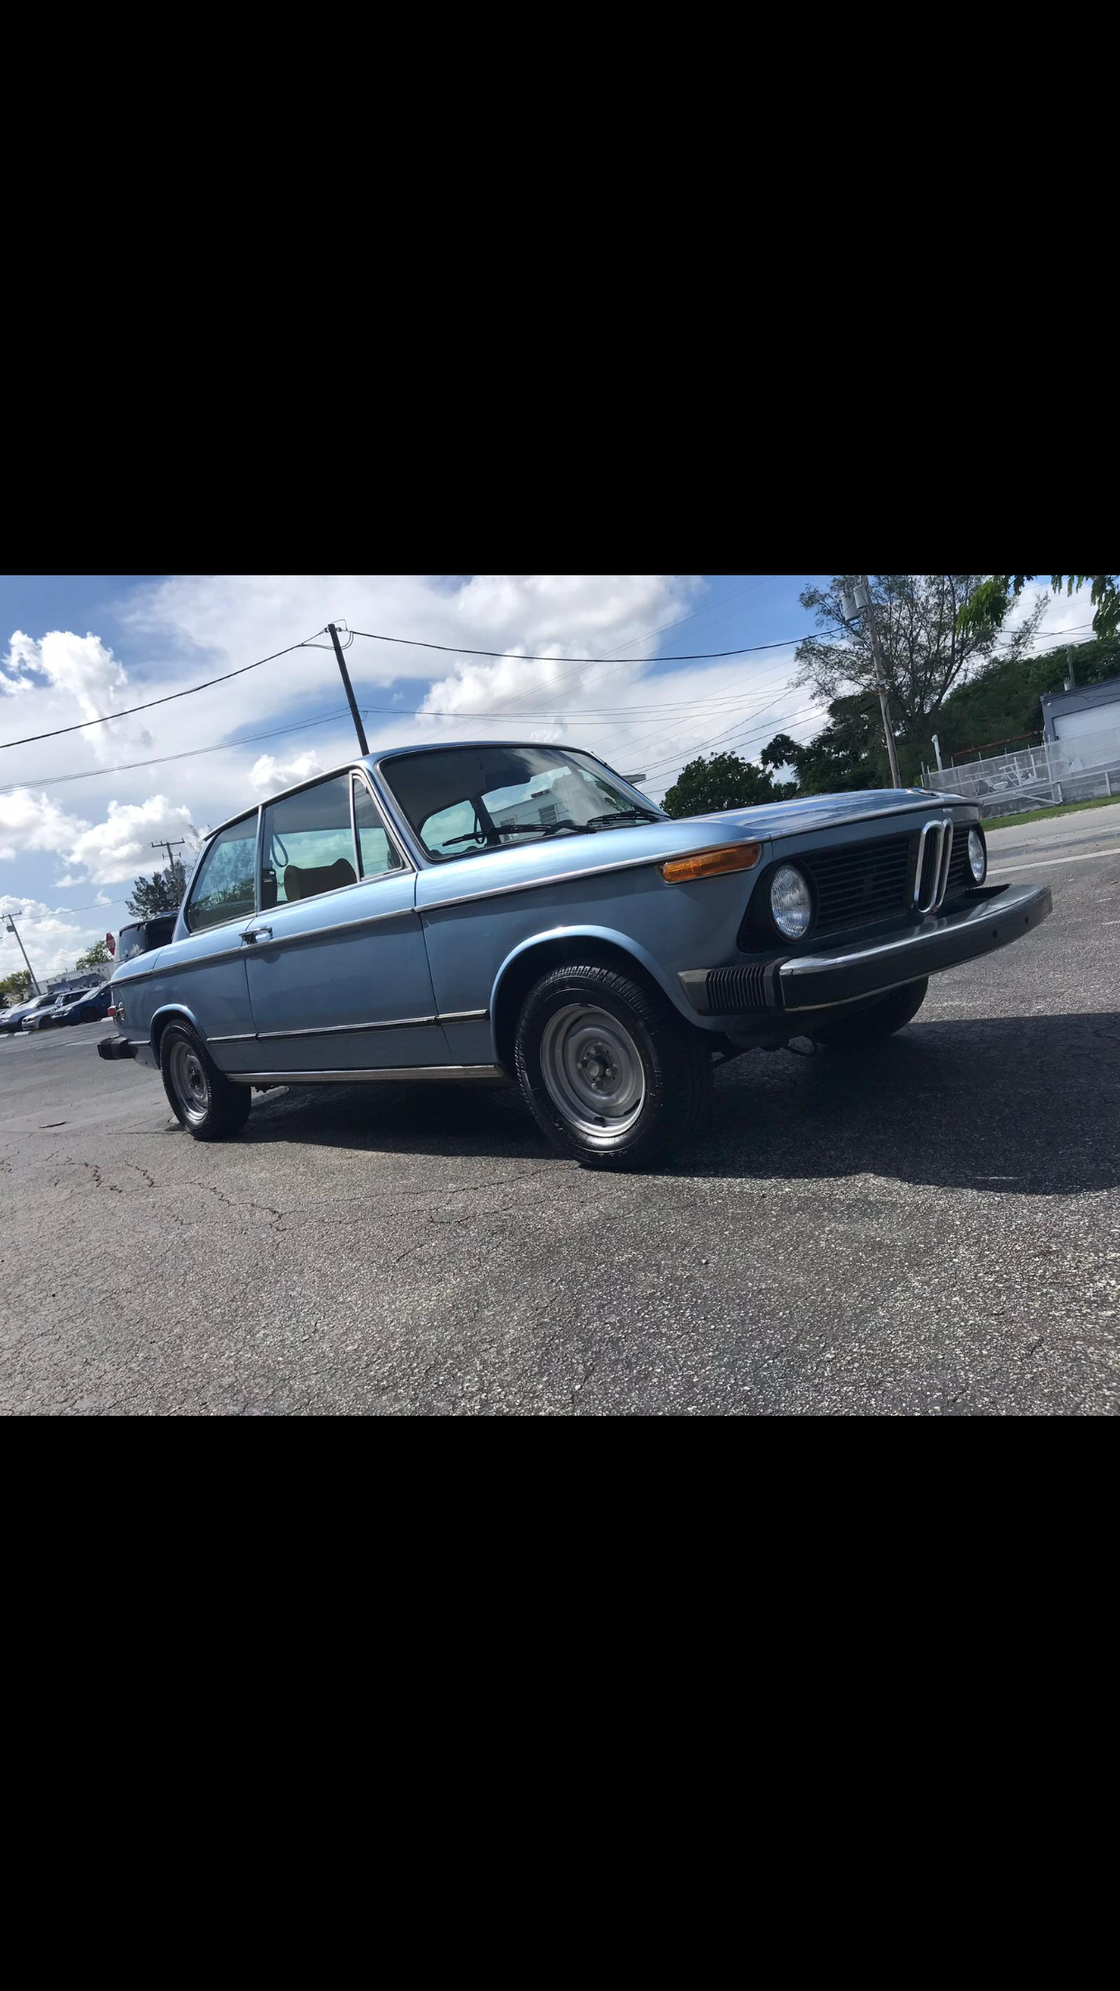 1974 BMW 2002tii - 1974 BMW Tii - Used - VIN 379654098703627 - 90,000 Miles - 4 cyl - 2WD - Coupe - Blue - Miami, FL 33176, United States